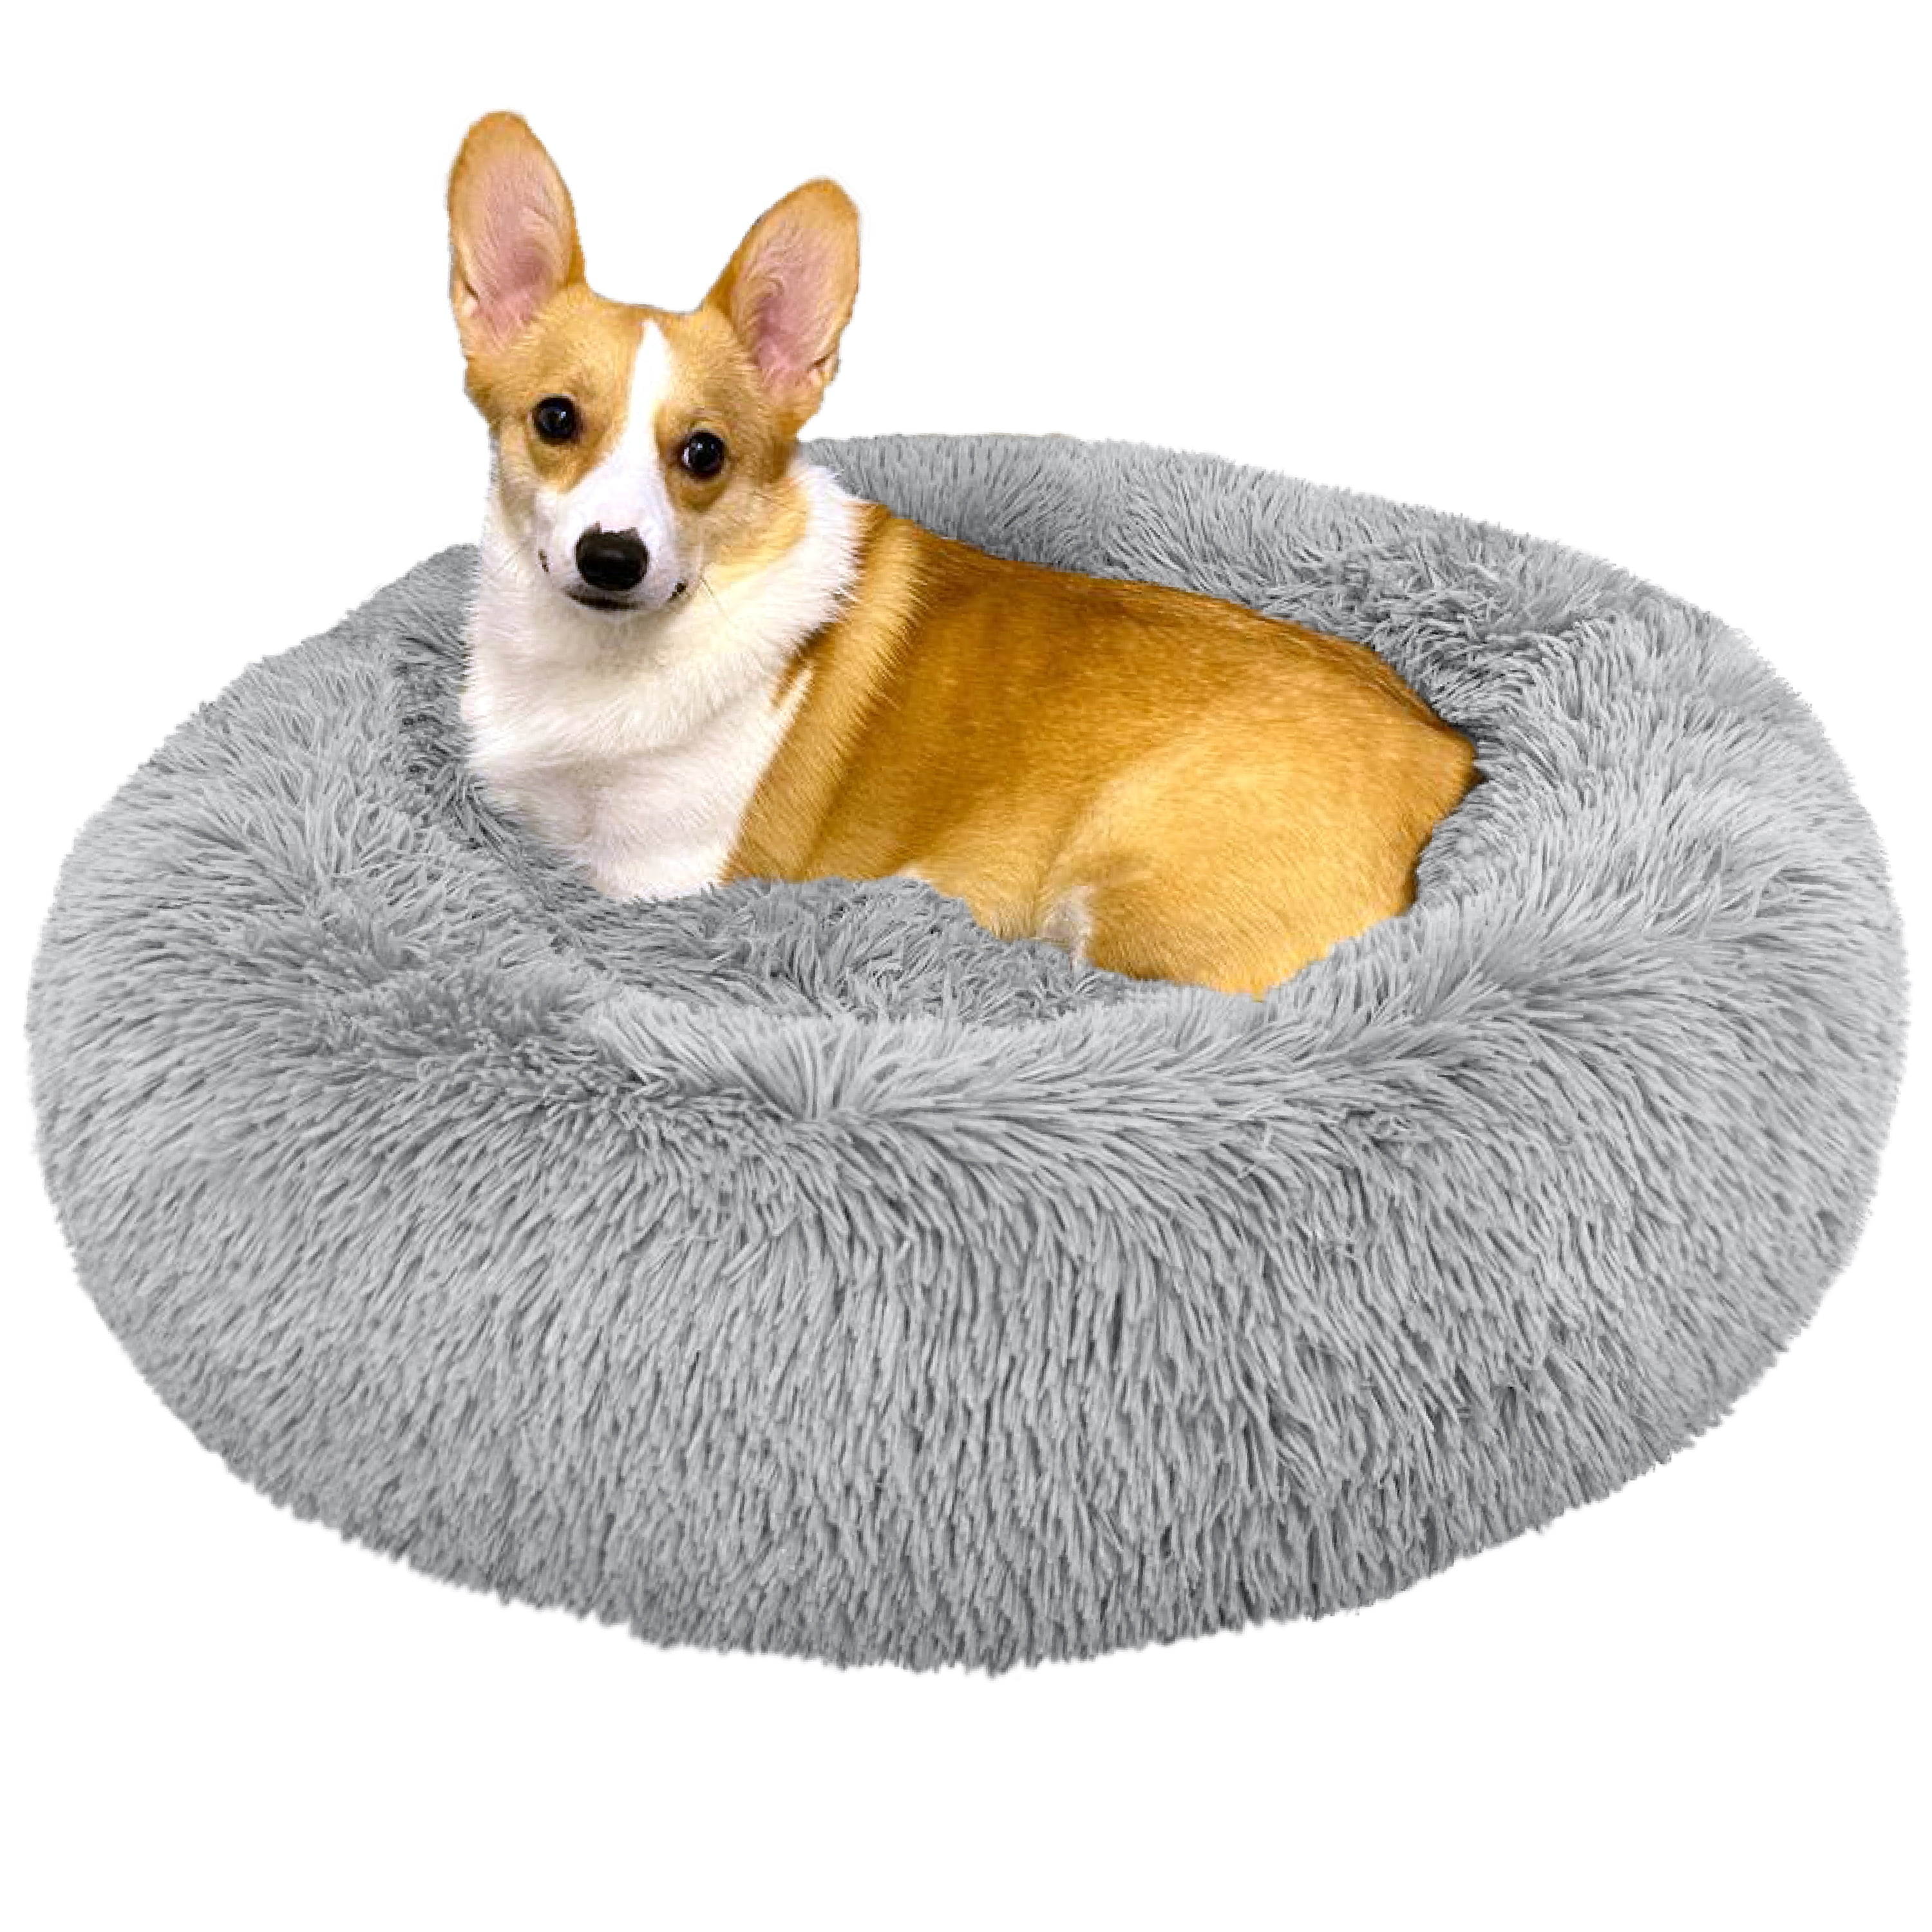 Grey 20 inch Large Pet Cozy Calming Bed Comfortable Anti Anxiety Donut Cuddle Round Kennel Ultra Soft for Dog Cat Sun-bathe Bask Cushion Sofa Pillow 